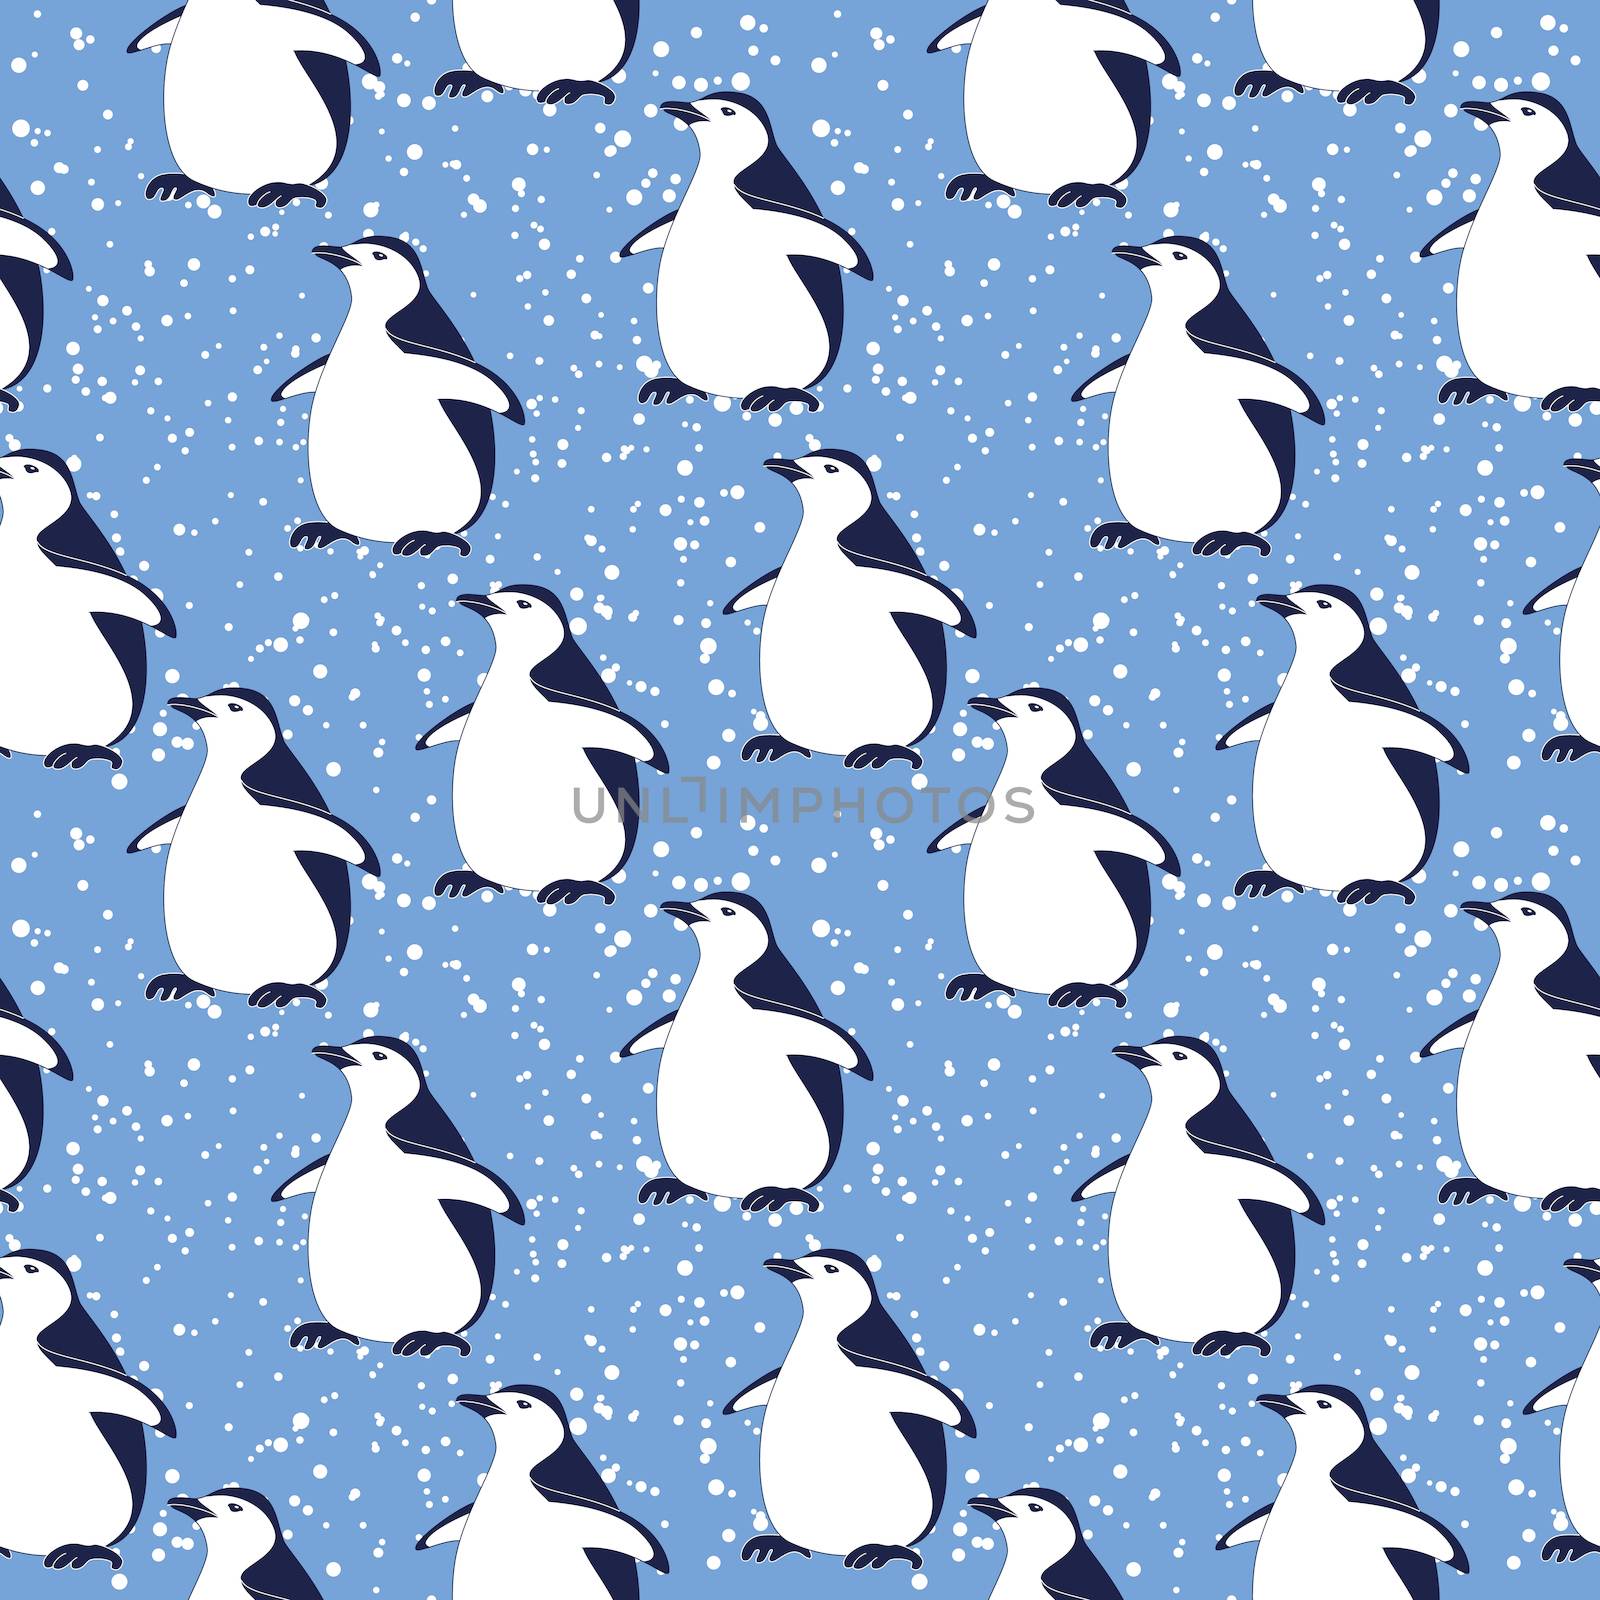 Seamless pattern, cartoon Antarctic penguins on a blue background with snowflakes.